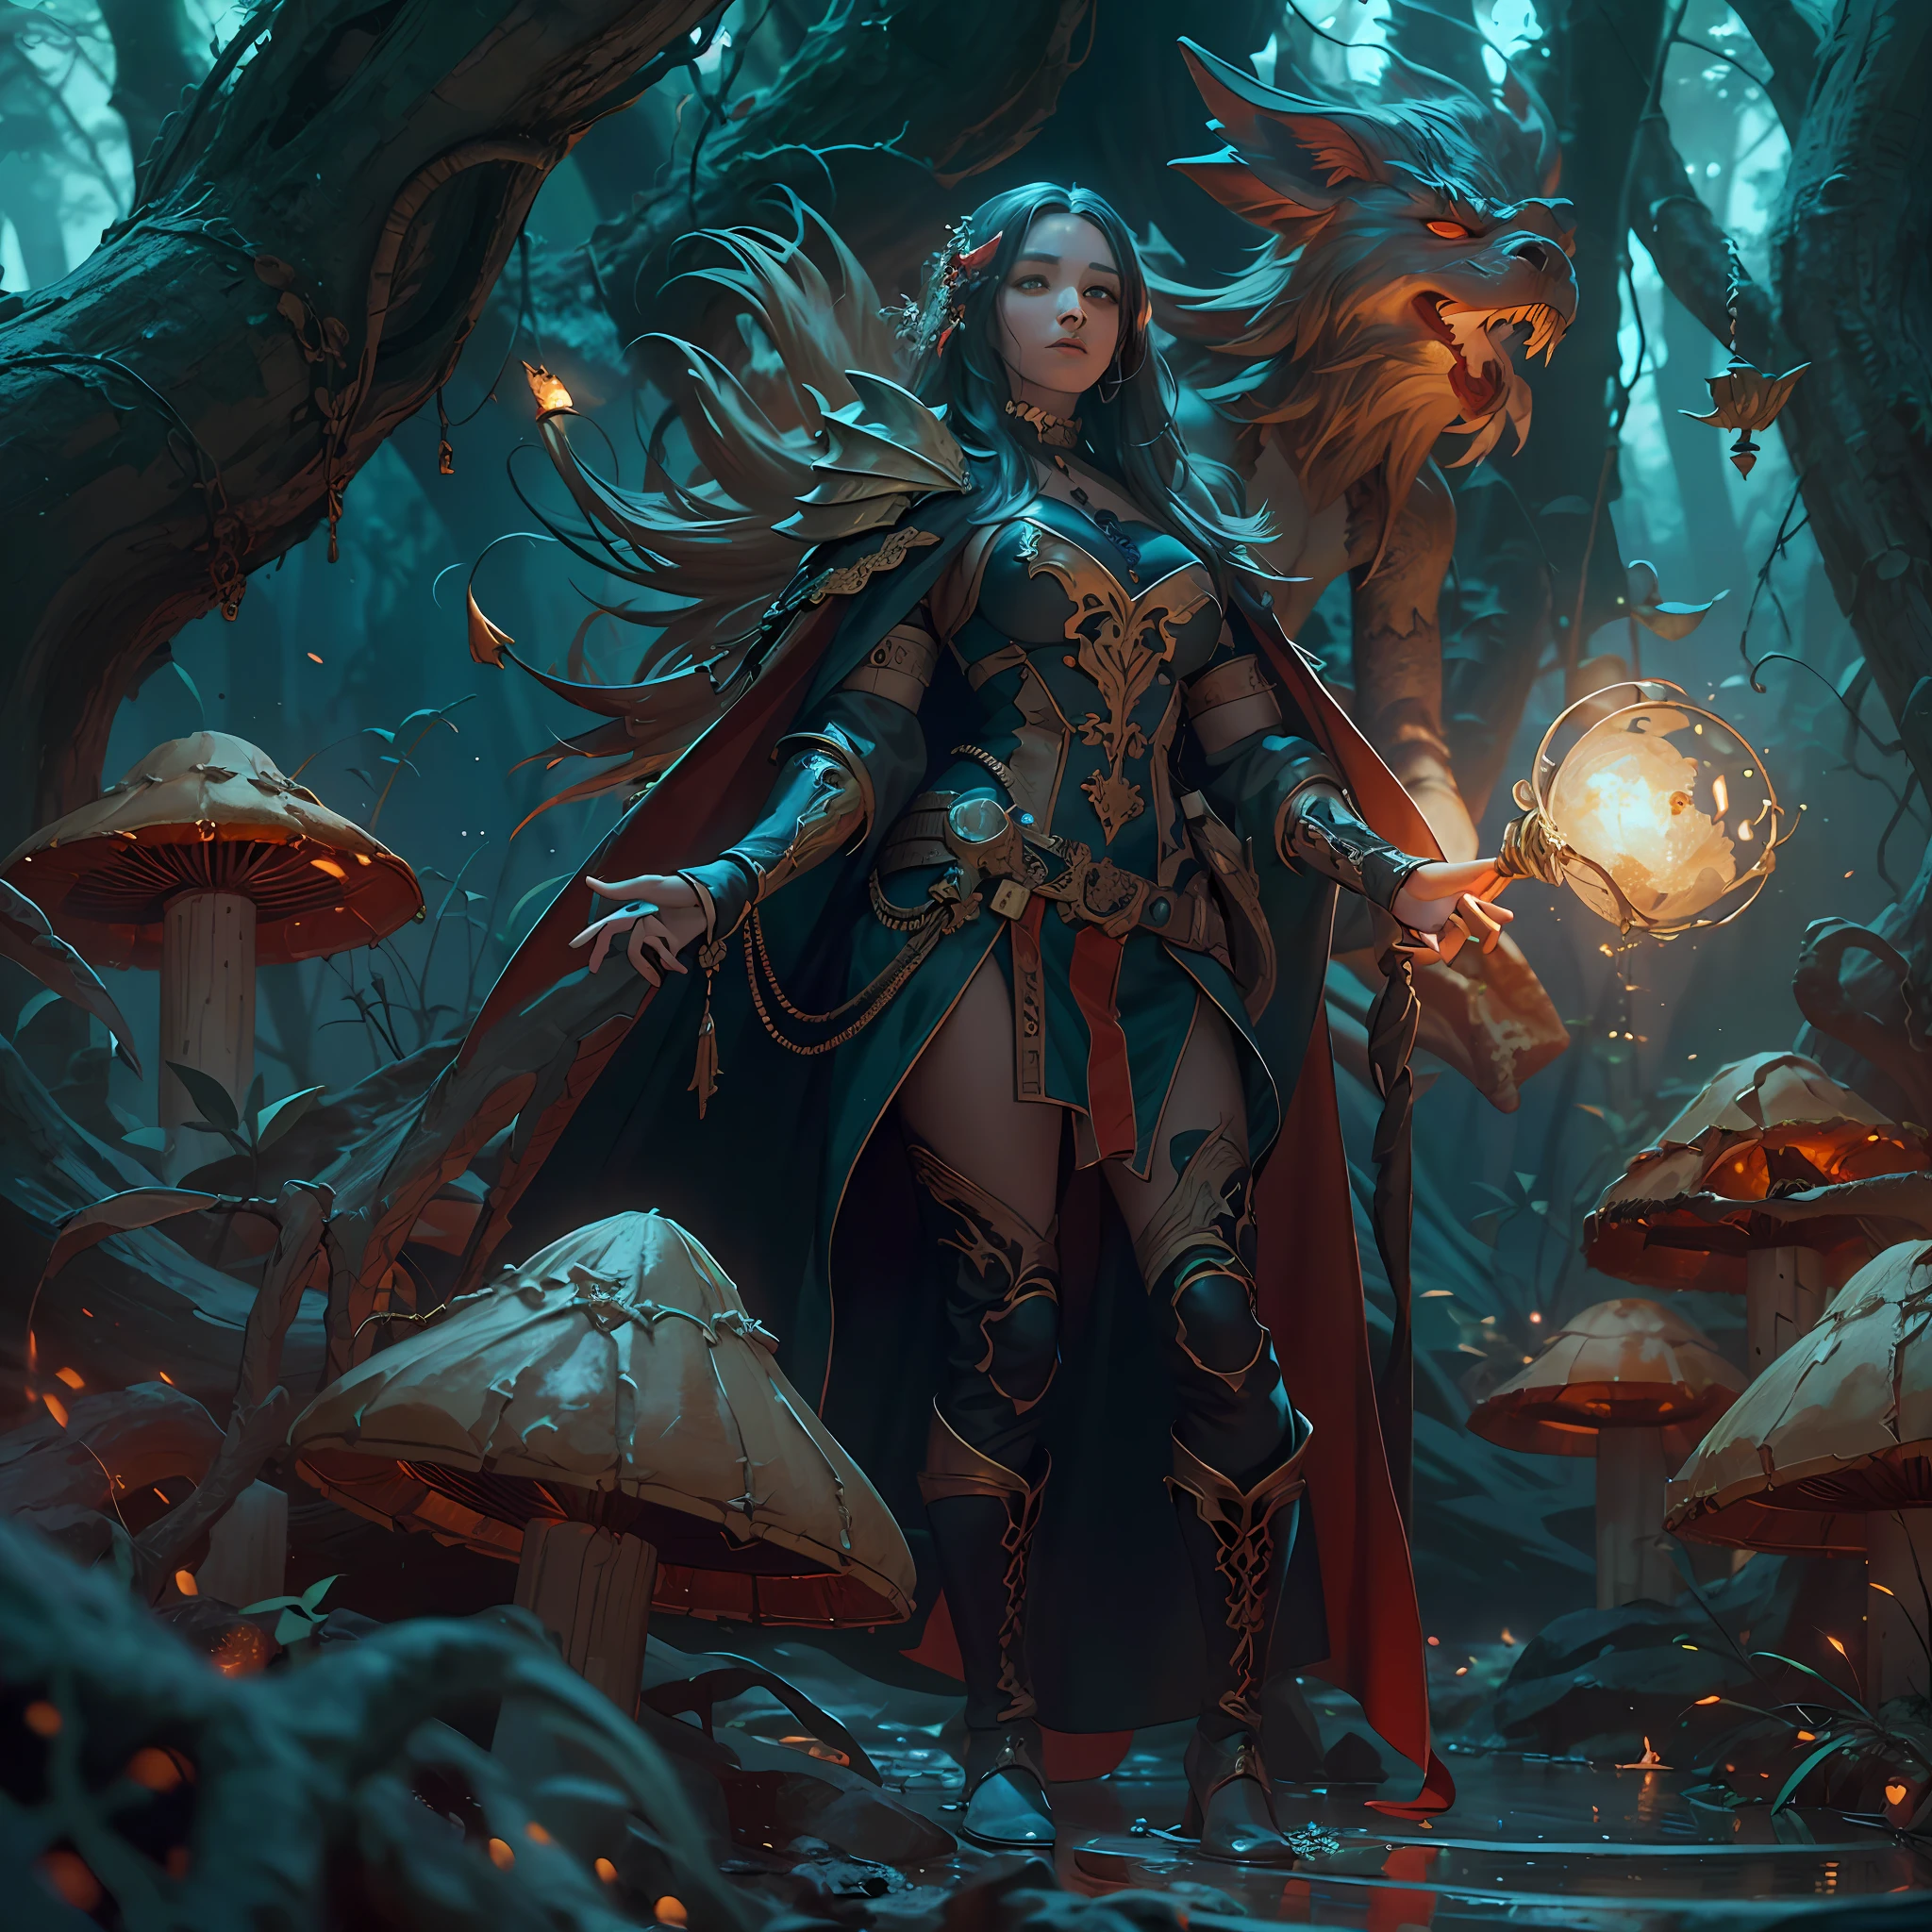 high details, best quality, 8k, [ultra detailed], masterpiece, best quality, (extremely detailed), ultra wide shot, photorealistic, fantasy art, dnd art, rpg art, realistic art, an ultra wide picture of human female (intense details, Masterpiece, best details: 1.5) in underground druid grove casting a spell, red magical light (intense details, Masterpiece, best details: 1.5), wearing leather armor (intense details, Masterpiece, best details: 1.5), wearing cloak (intense details, Masterpiece, best details: 1.5), wearing  boots, high heeled boots,  holy symbol, blue light from symbol, dynamic hair, intense eyes, dynamic eyes, D&D human female (intense details, Masterpiece, best details: 1.5), black hair, long hair, fantasy [underground] (intense details, Masterpiece, best details: 1.5), druid grove, water fall details, rich fantasy underground life details (intense details, Masterpiece, best details: 1.5) ,stone pillars (intense details, Masterpiece, best details: 1.5),  animals, water springs, soft light, phosphoric light. dynamic light (intense details, Masterpiece, best details: 1.5), fungi in the background, celestial background, ((divine worship atmosphere)), high details, best quality, highres, ultra wide angle, octane rendering